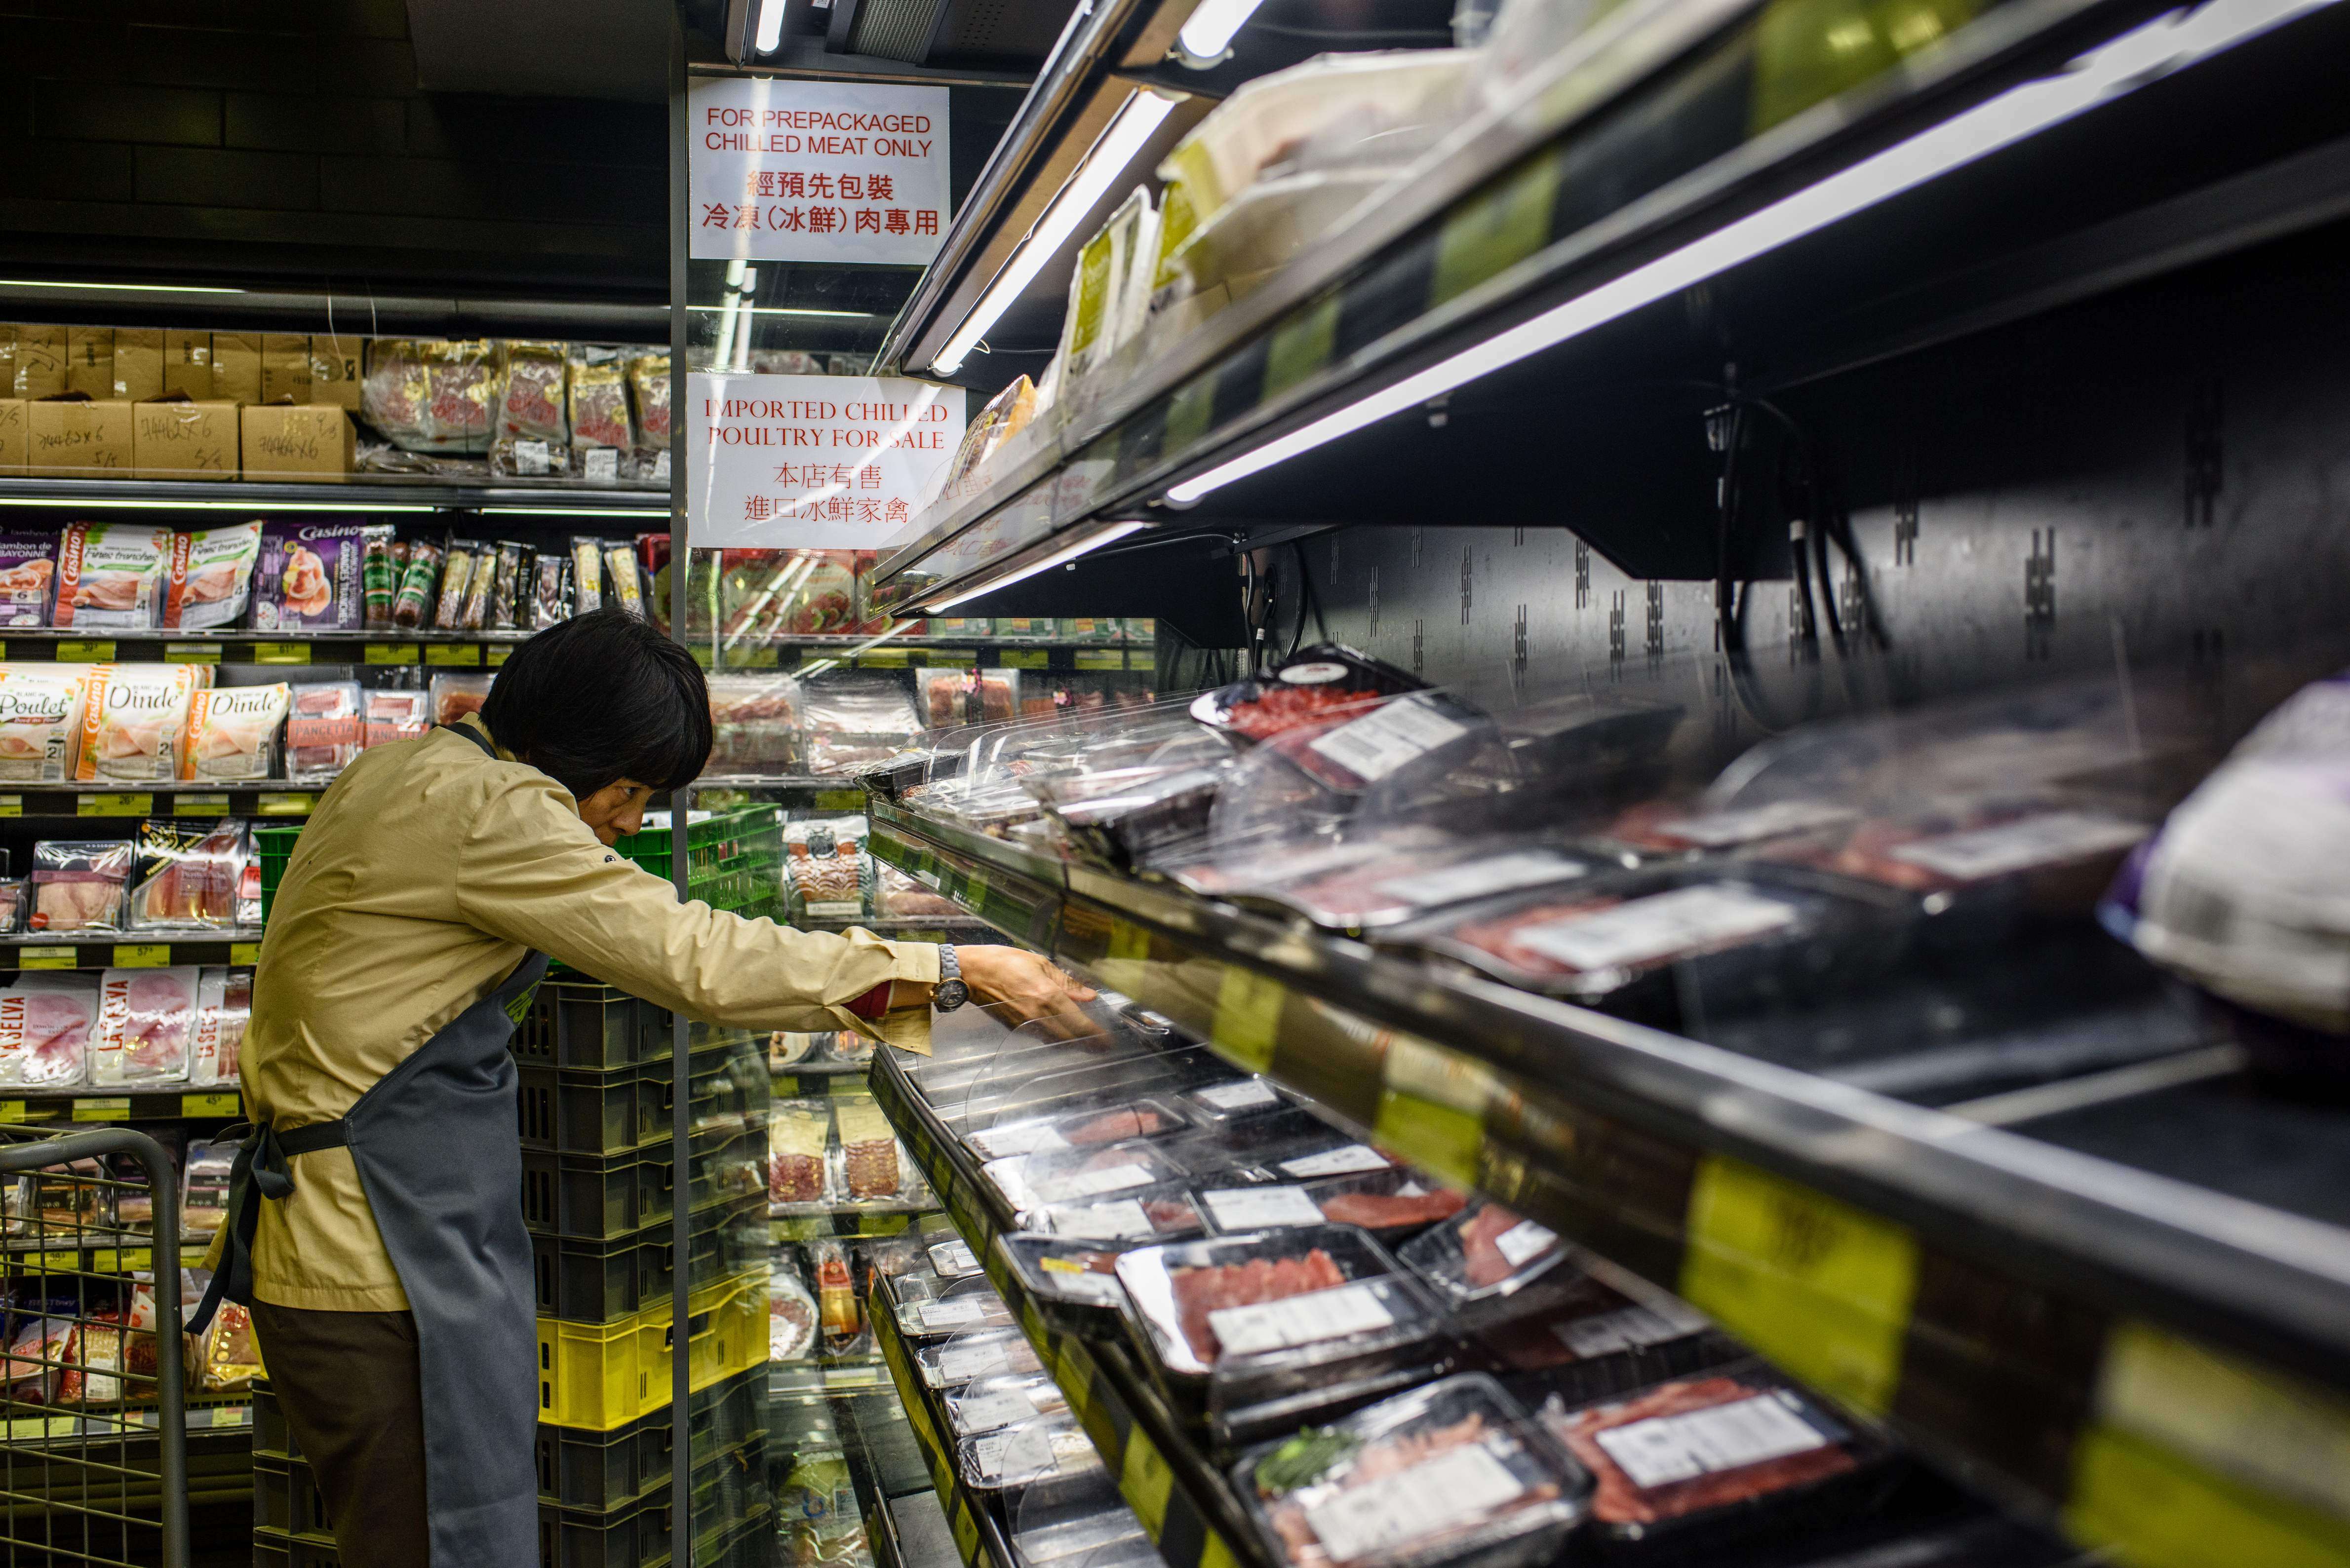 Supermarket employees cleared shelves of Brazilian meat products. Photo: AFP